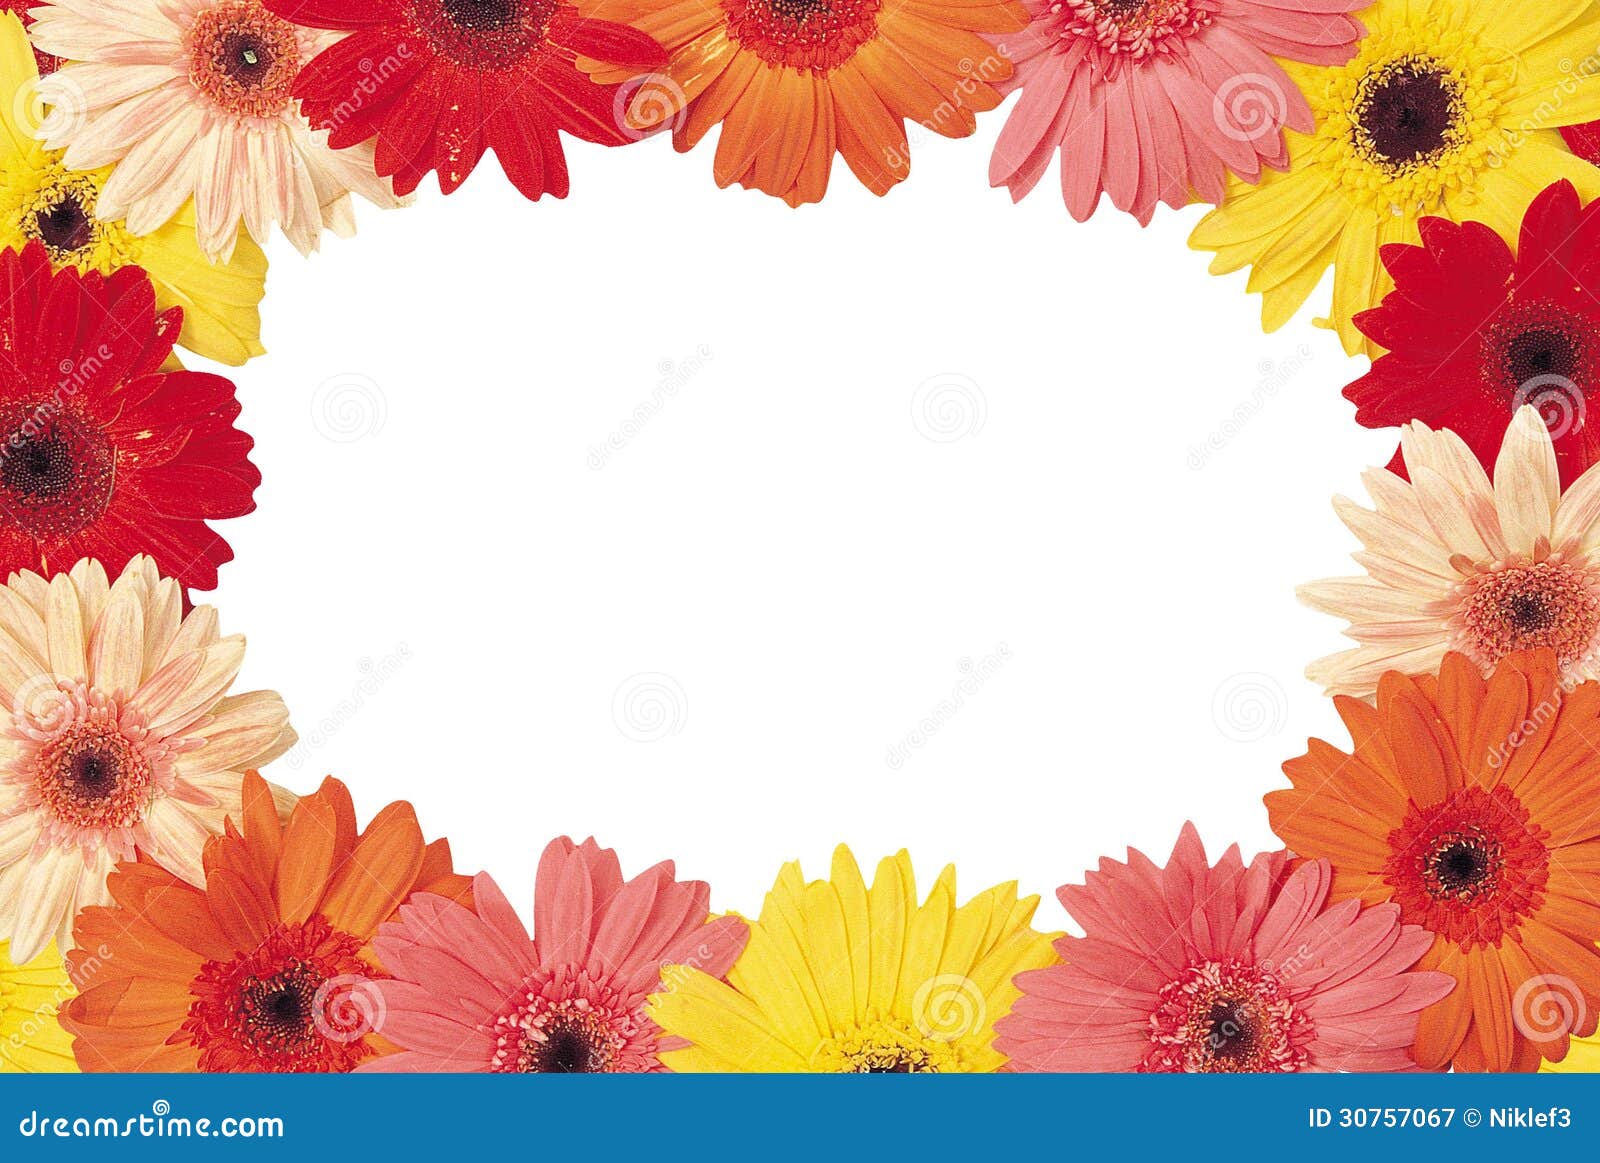 beautiful bouquet of red and yellow flowers on a white background there is a place for text